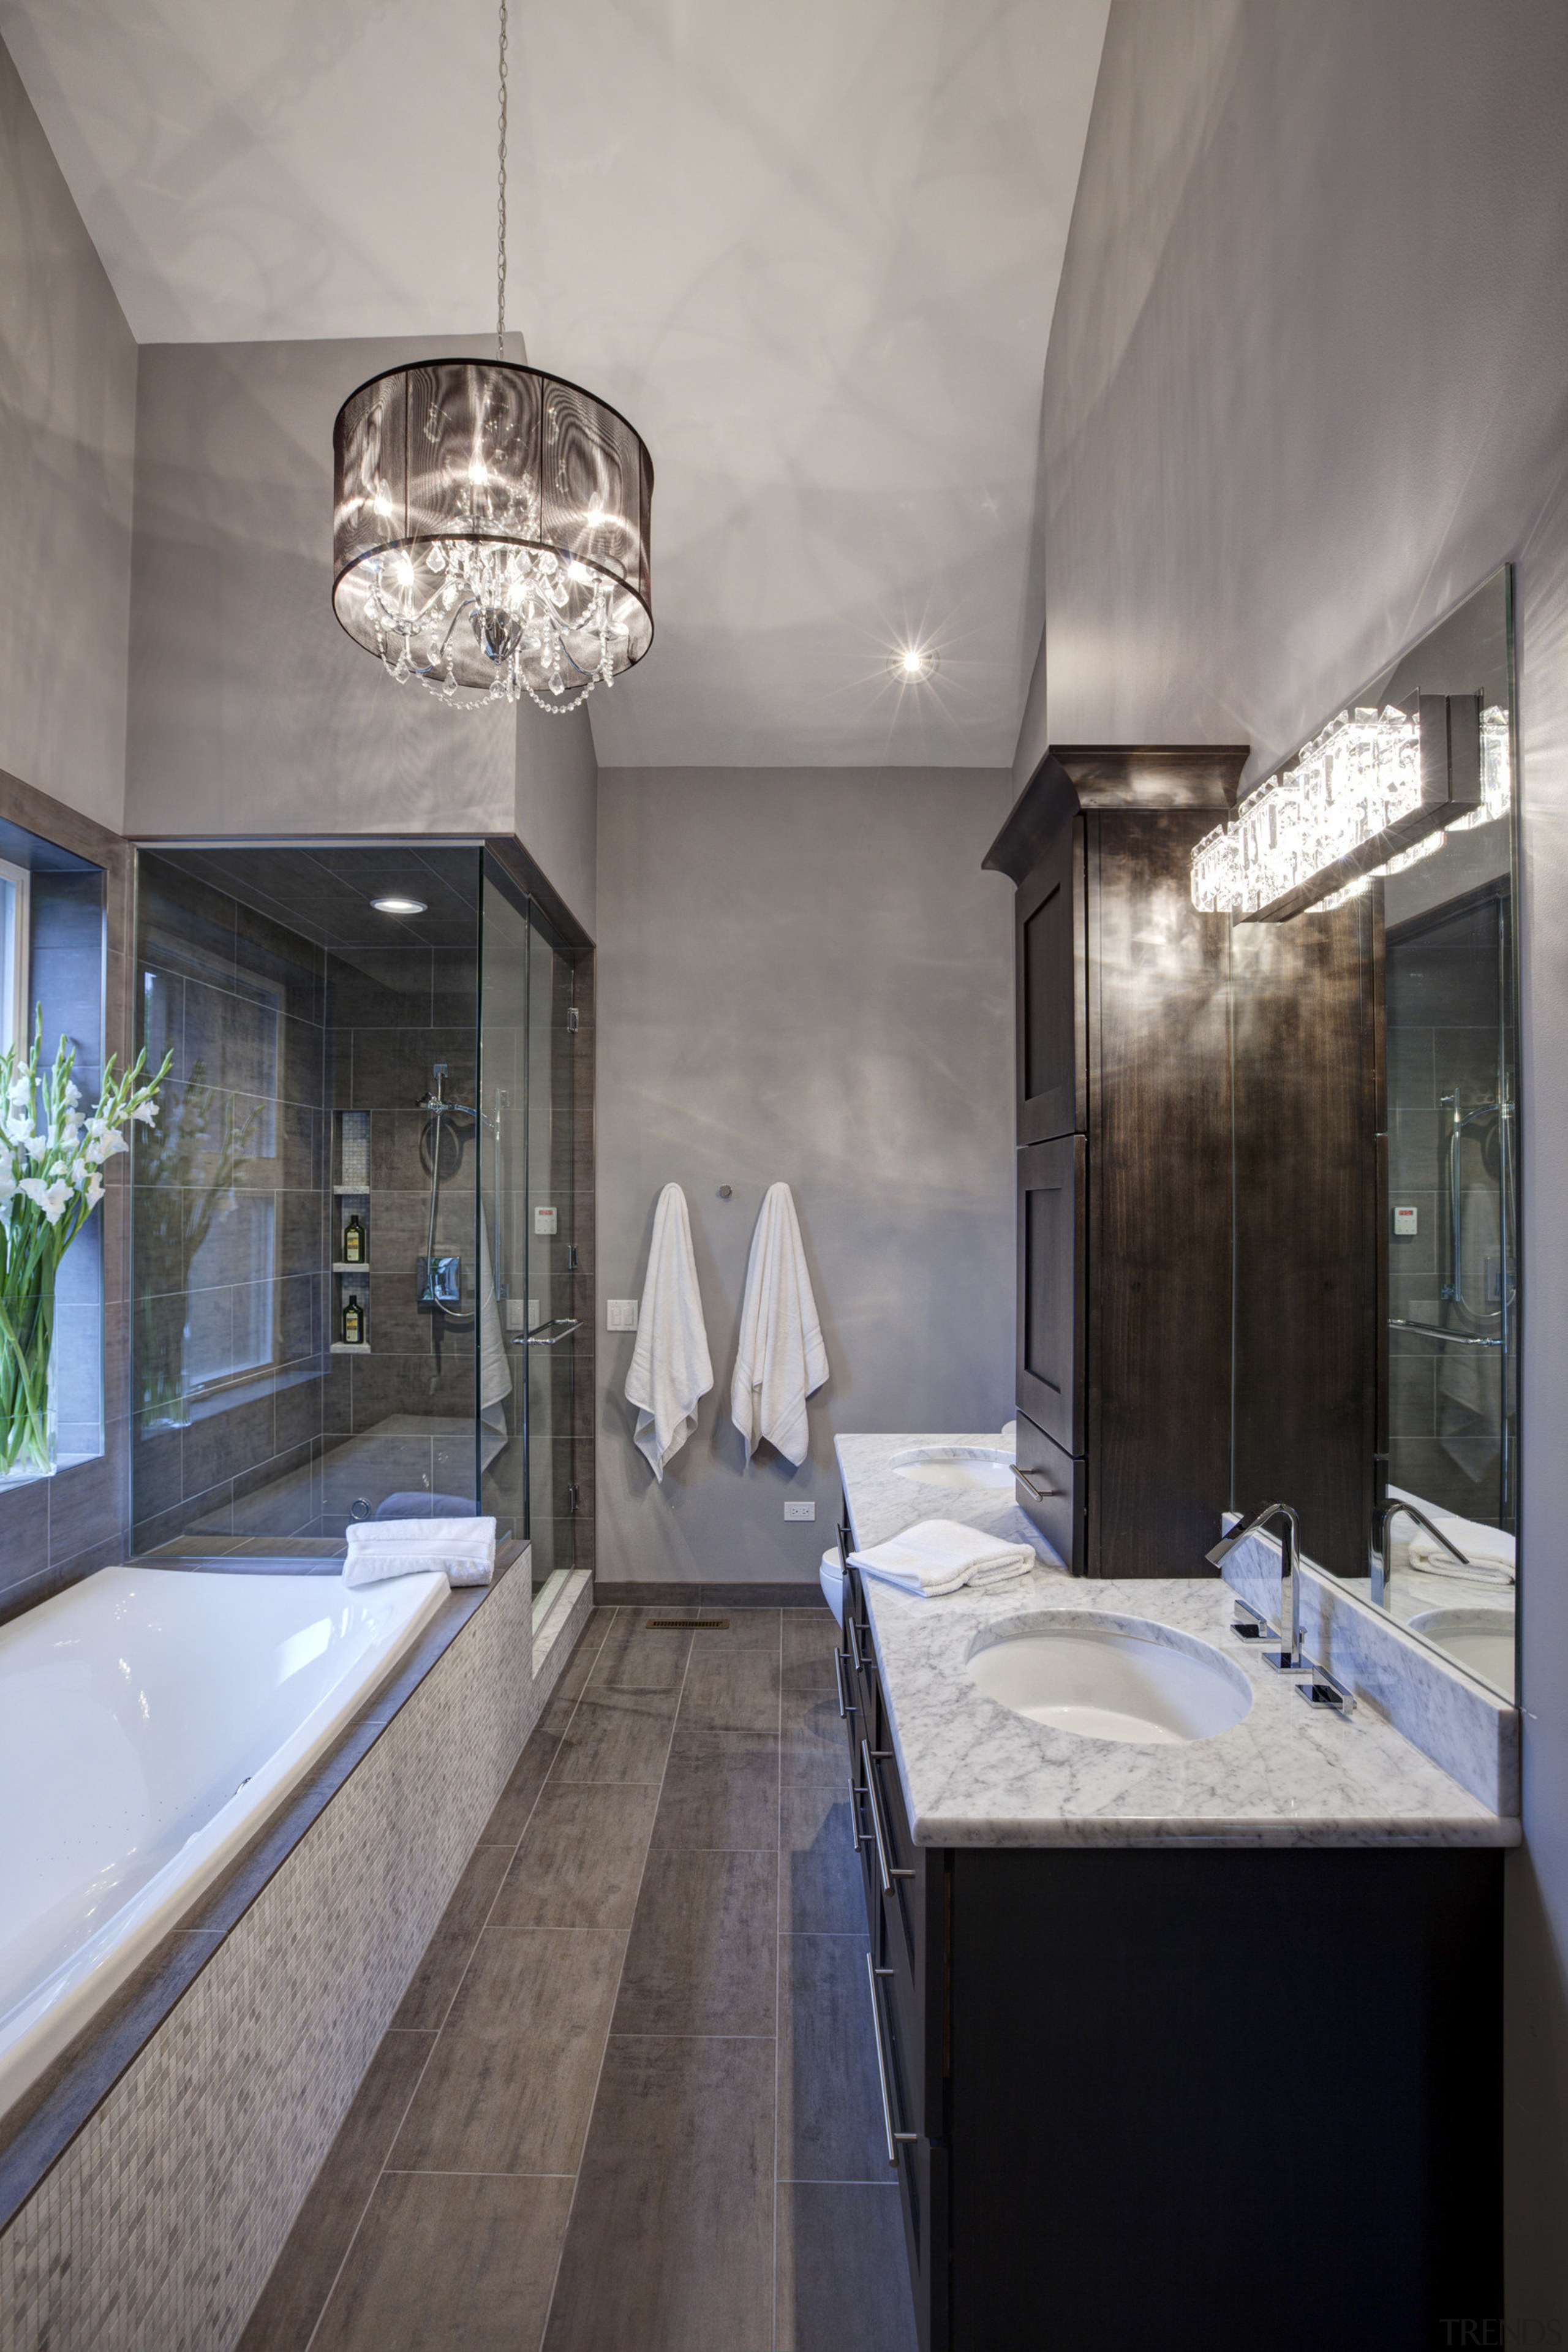 Narrow bathroom, glass shower and carera marble - architecture, bathroom, ceiling, countertop, daylighting, estate, house, interior design, gray